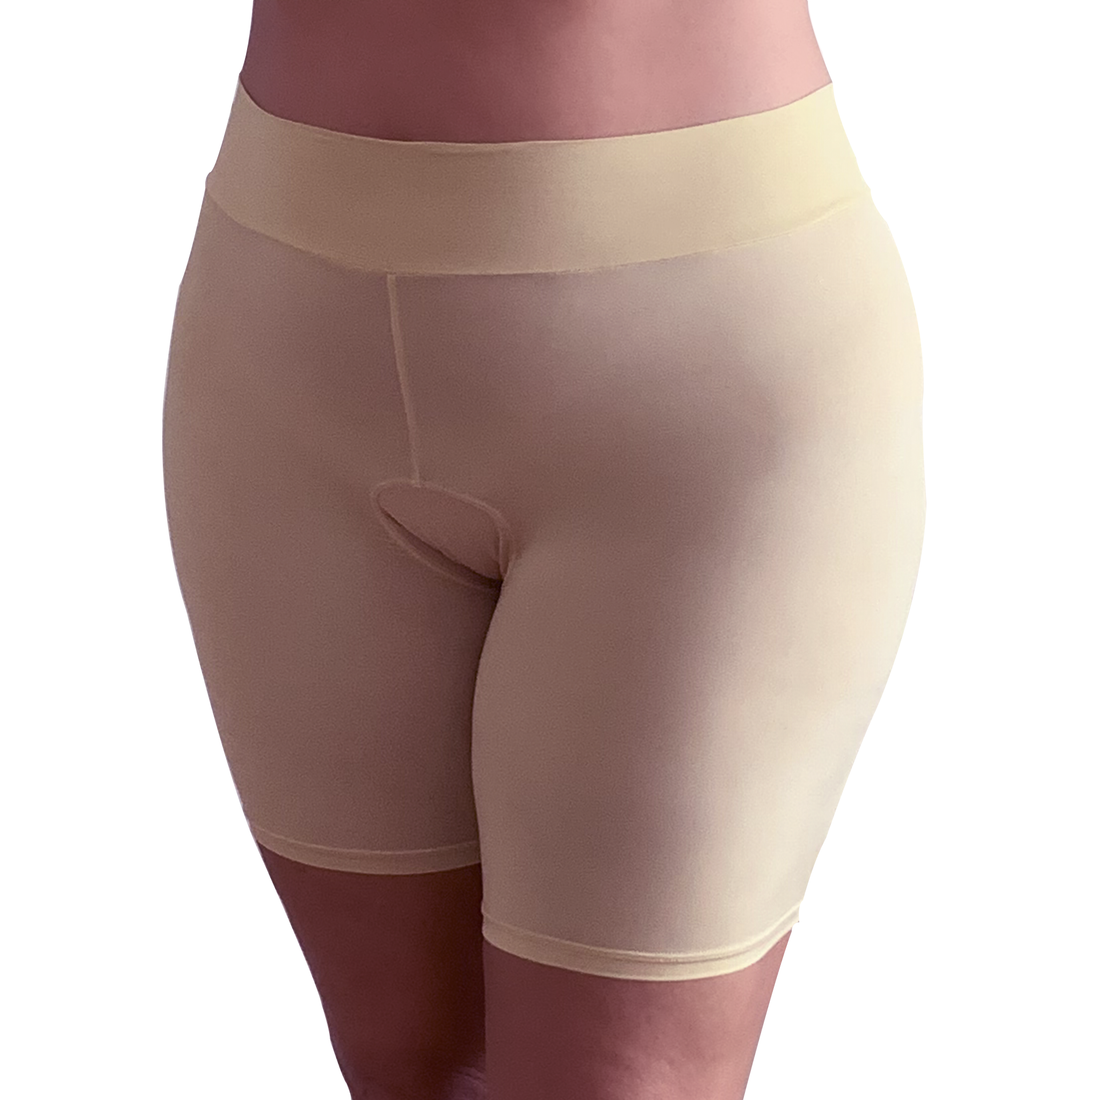 Essential Beige color Skanties in XS to XXL, offering seamless integration with any outfit for daily comfort. No Muffin Tops, No chafe and No panty lines, Smooth comfort all day